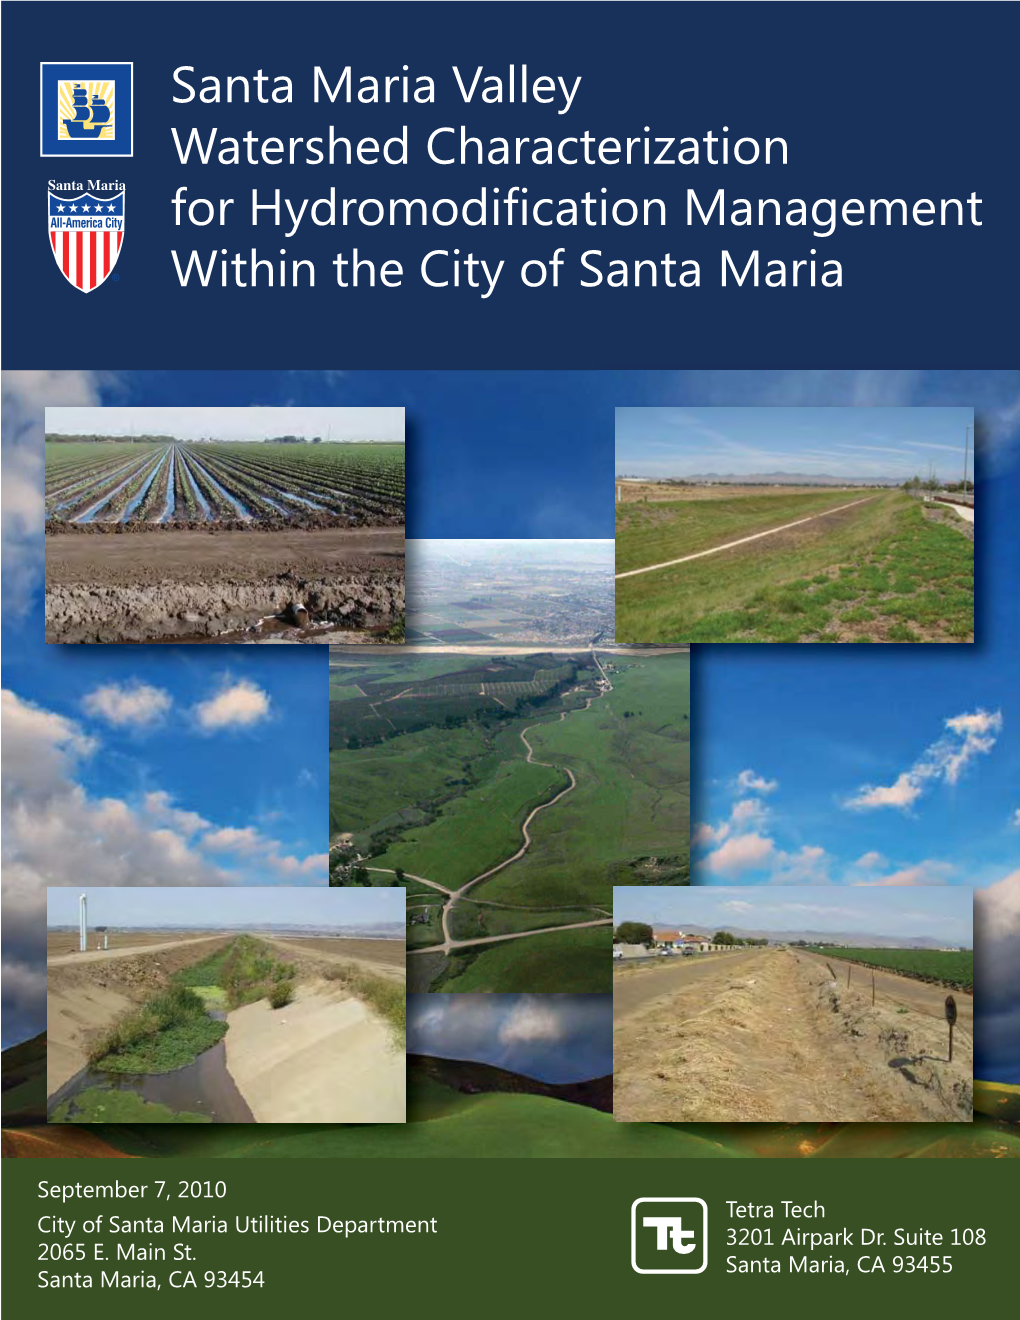 Santa Maria Valley Watershed Characterization for Hydromodification Management Within the City of Santa Maria